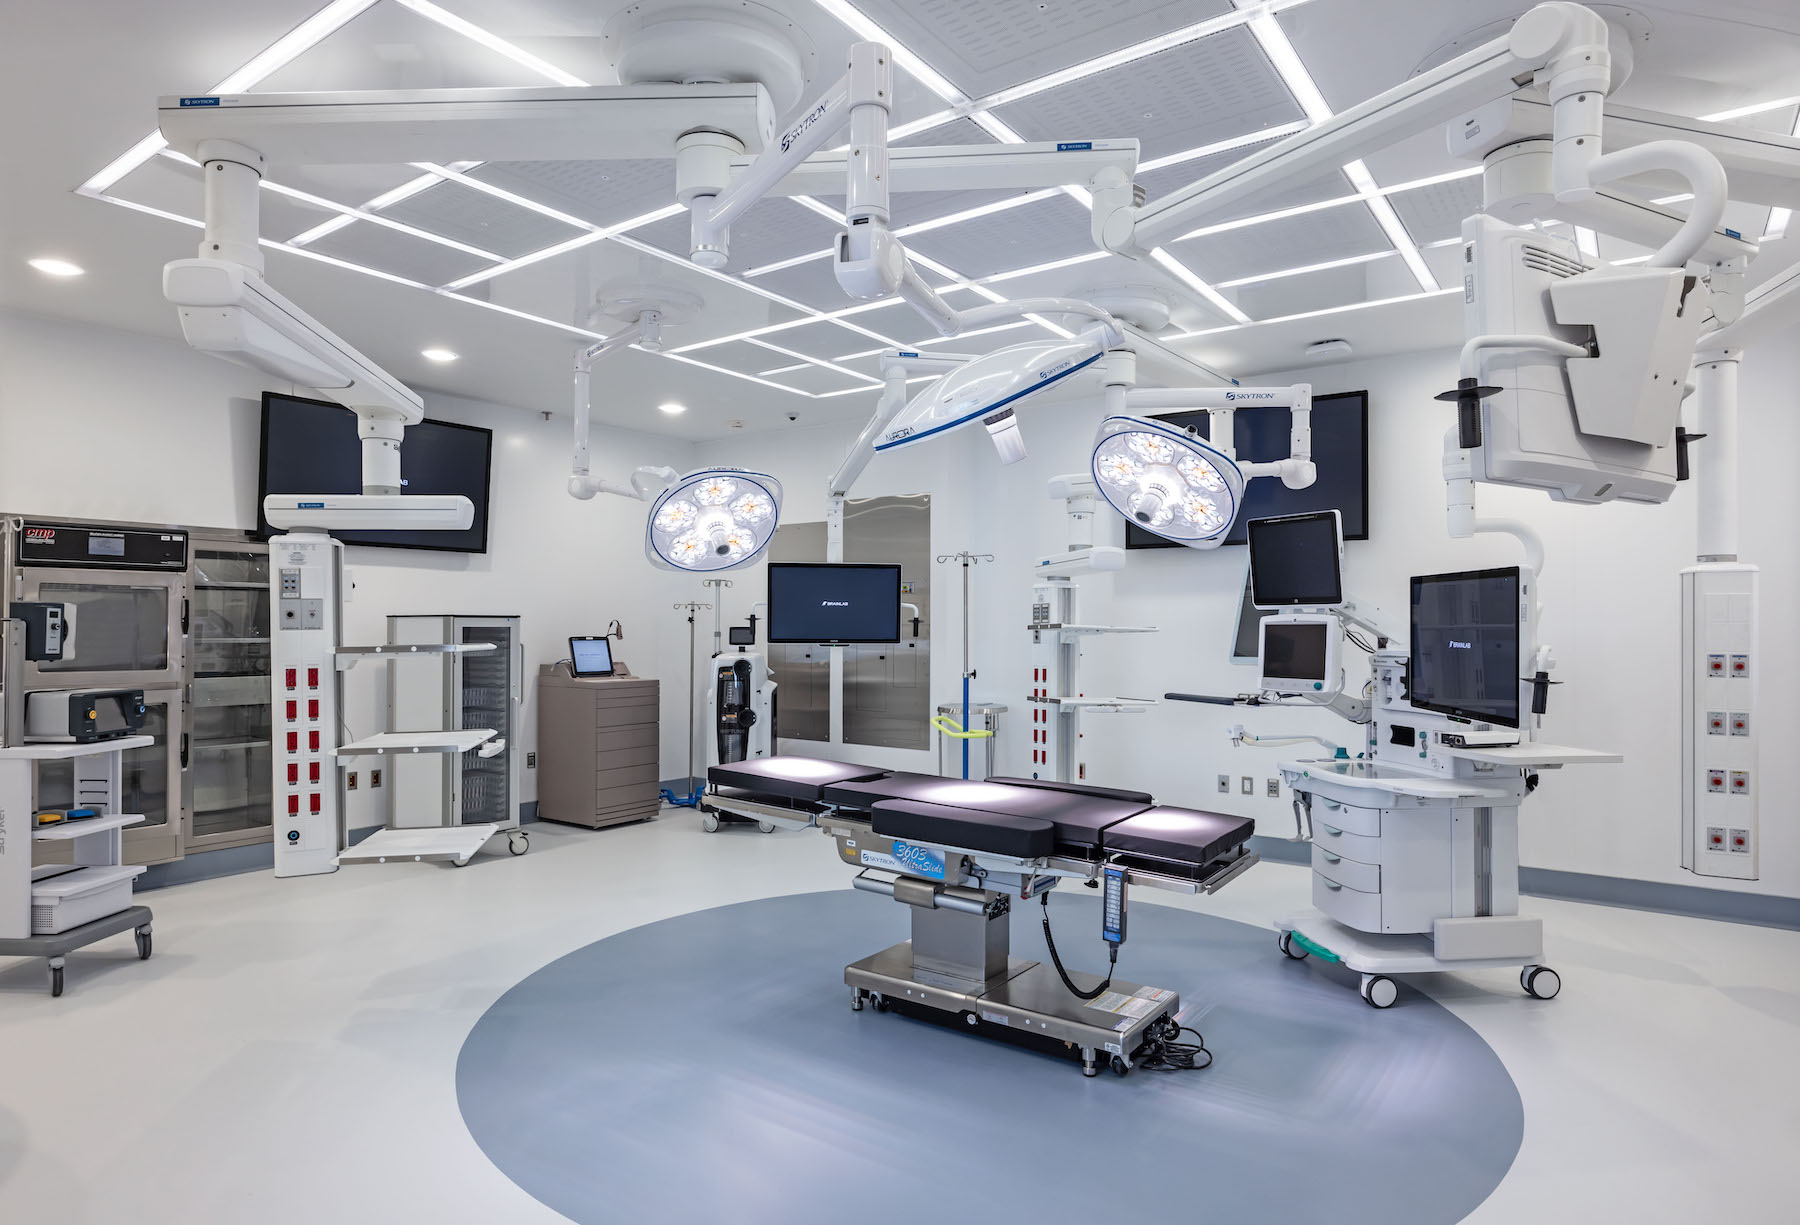 One of 18 operating rooms in the new tower.